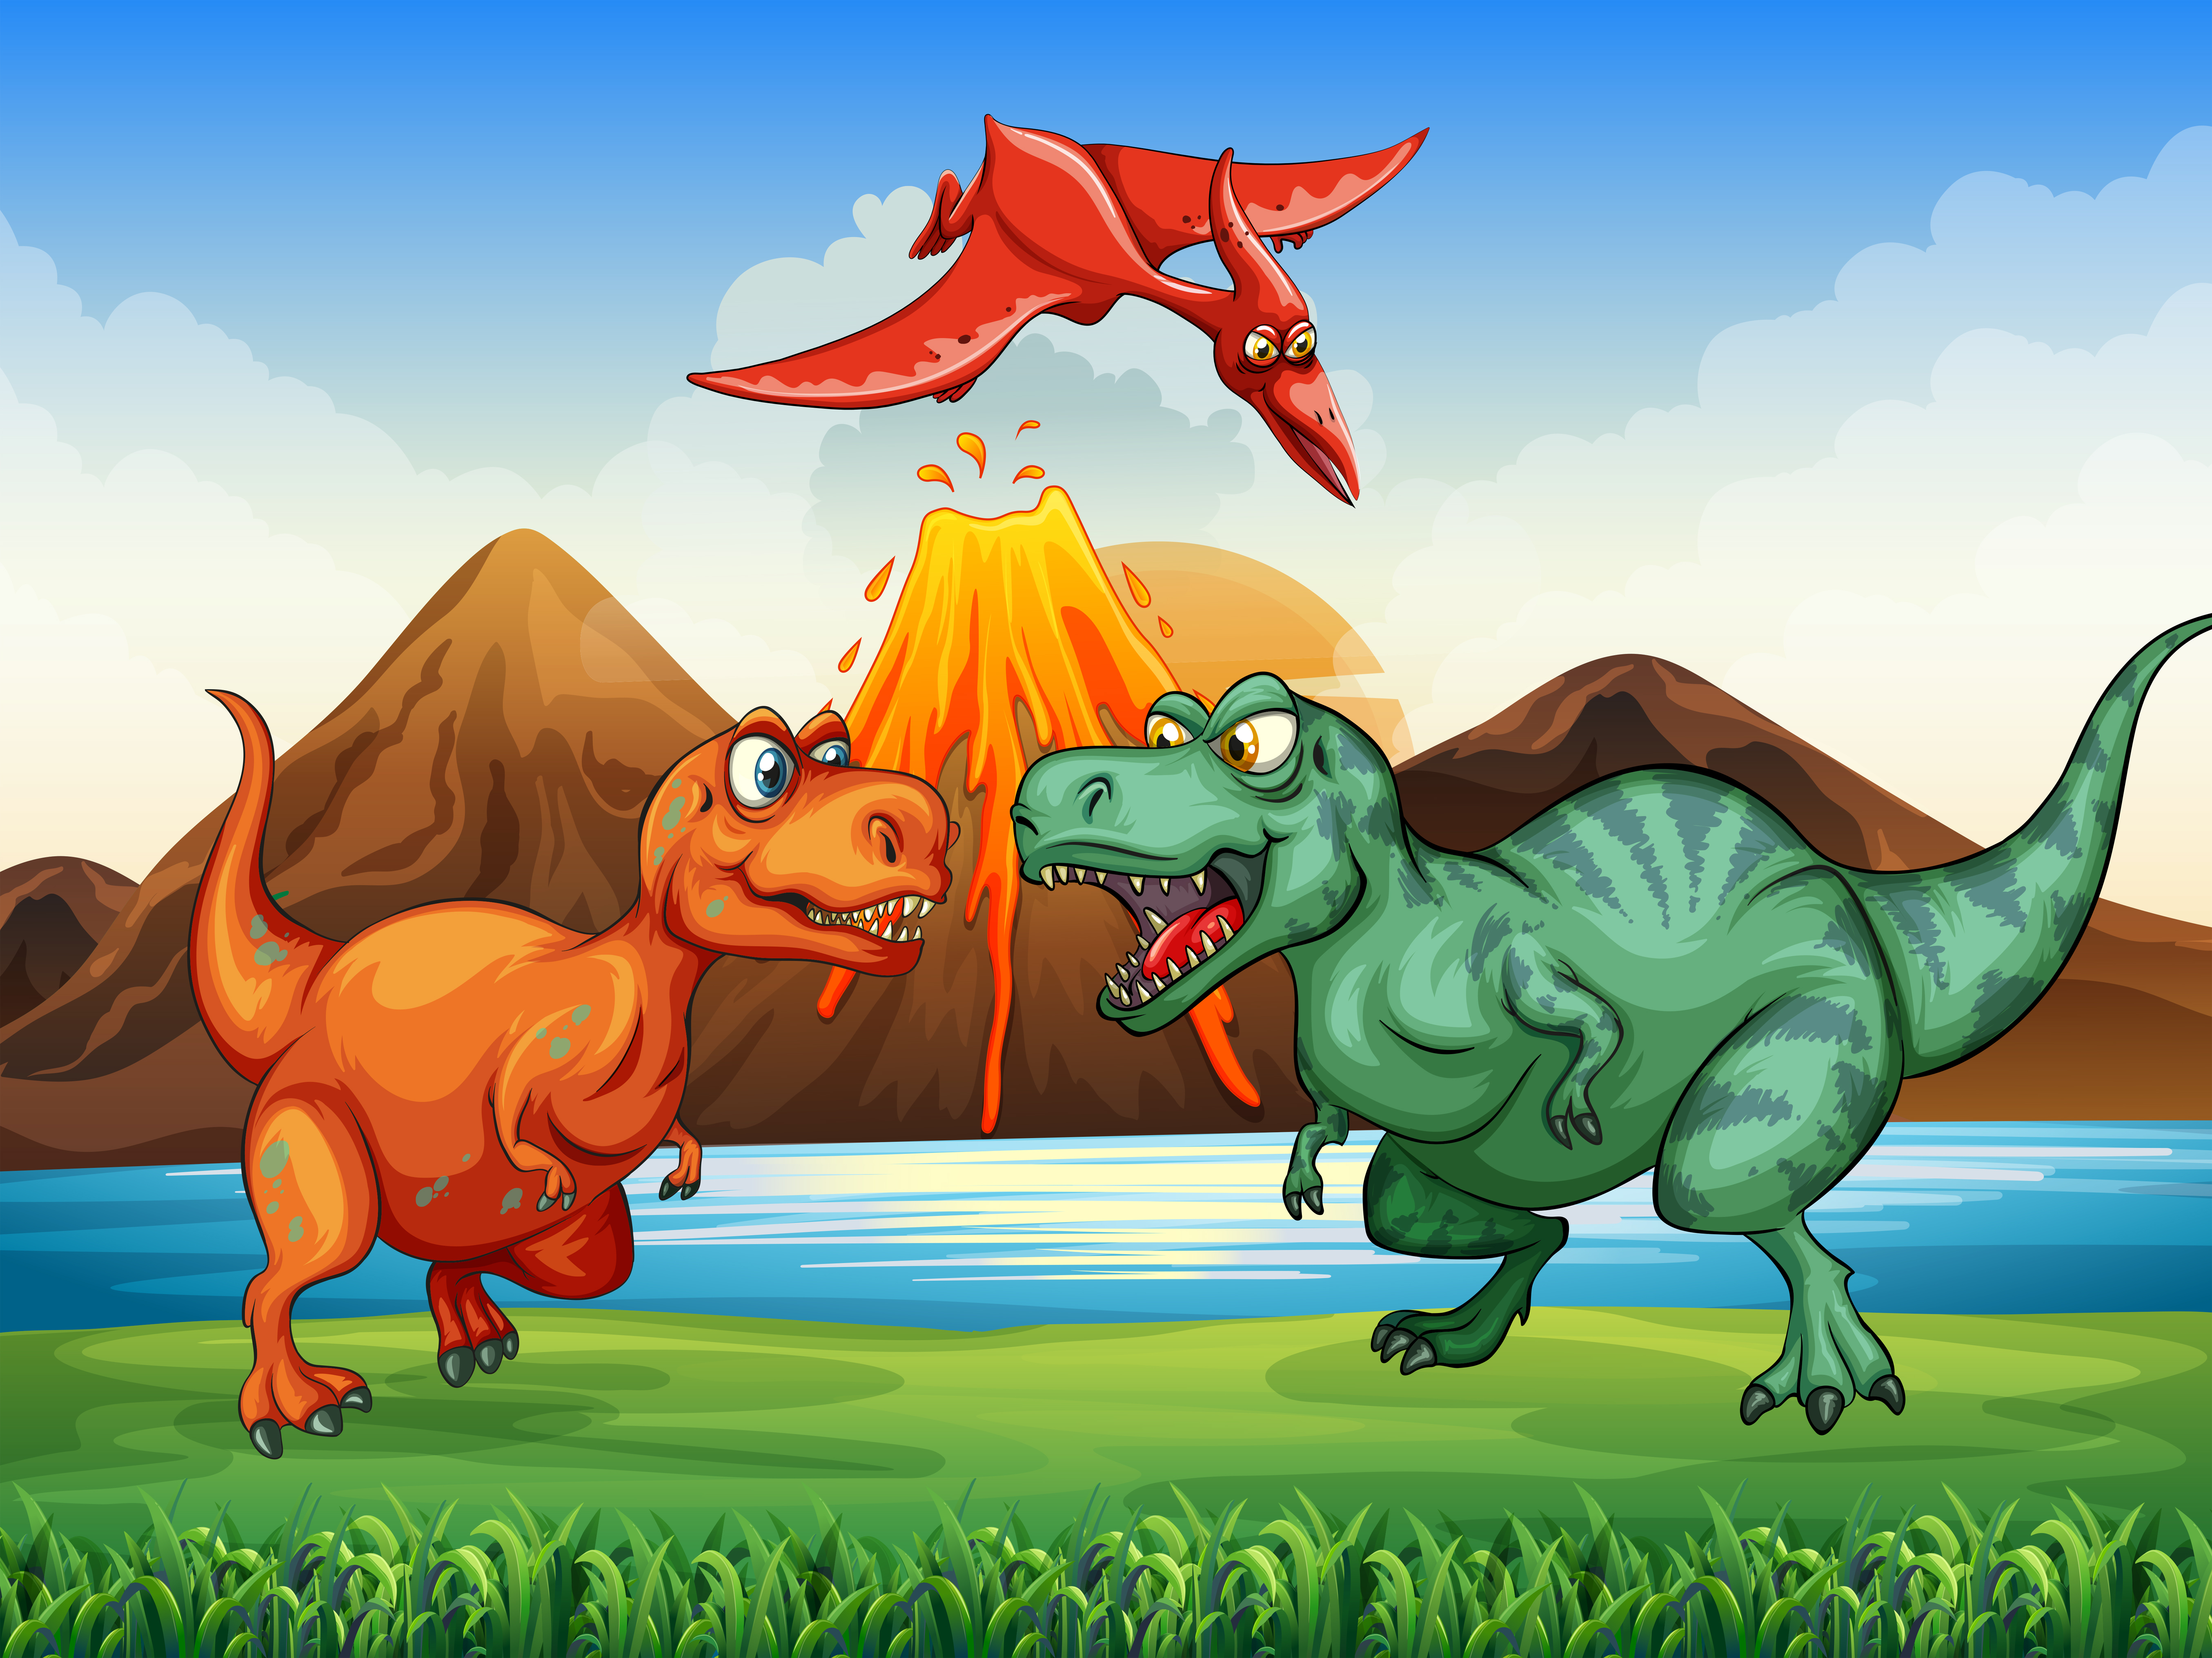 Dinosaurs fighting in the field - Download Free Vectors ...